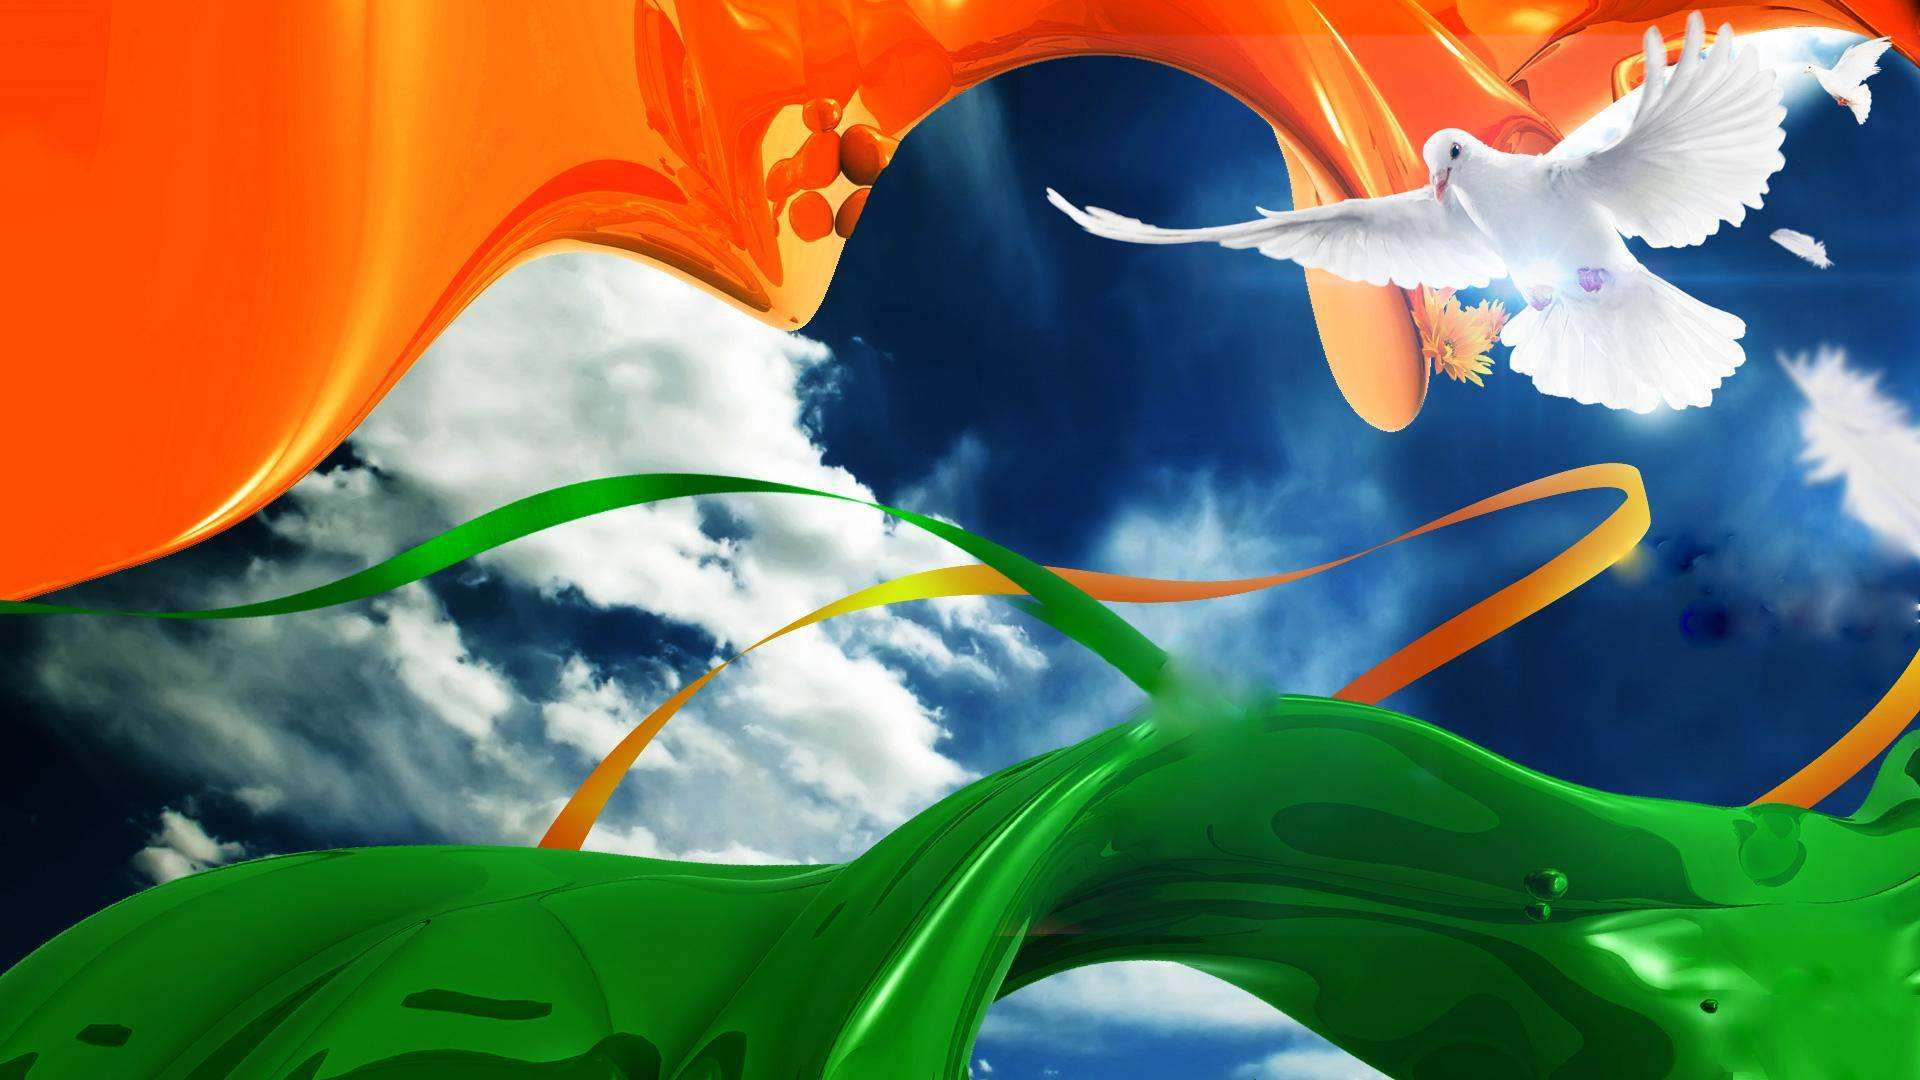 Download Republic Day HD Wallpaper, Image for Mobile and PC